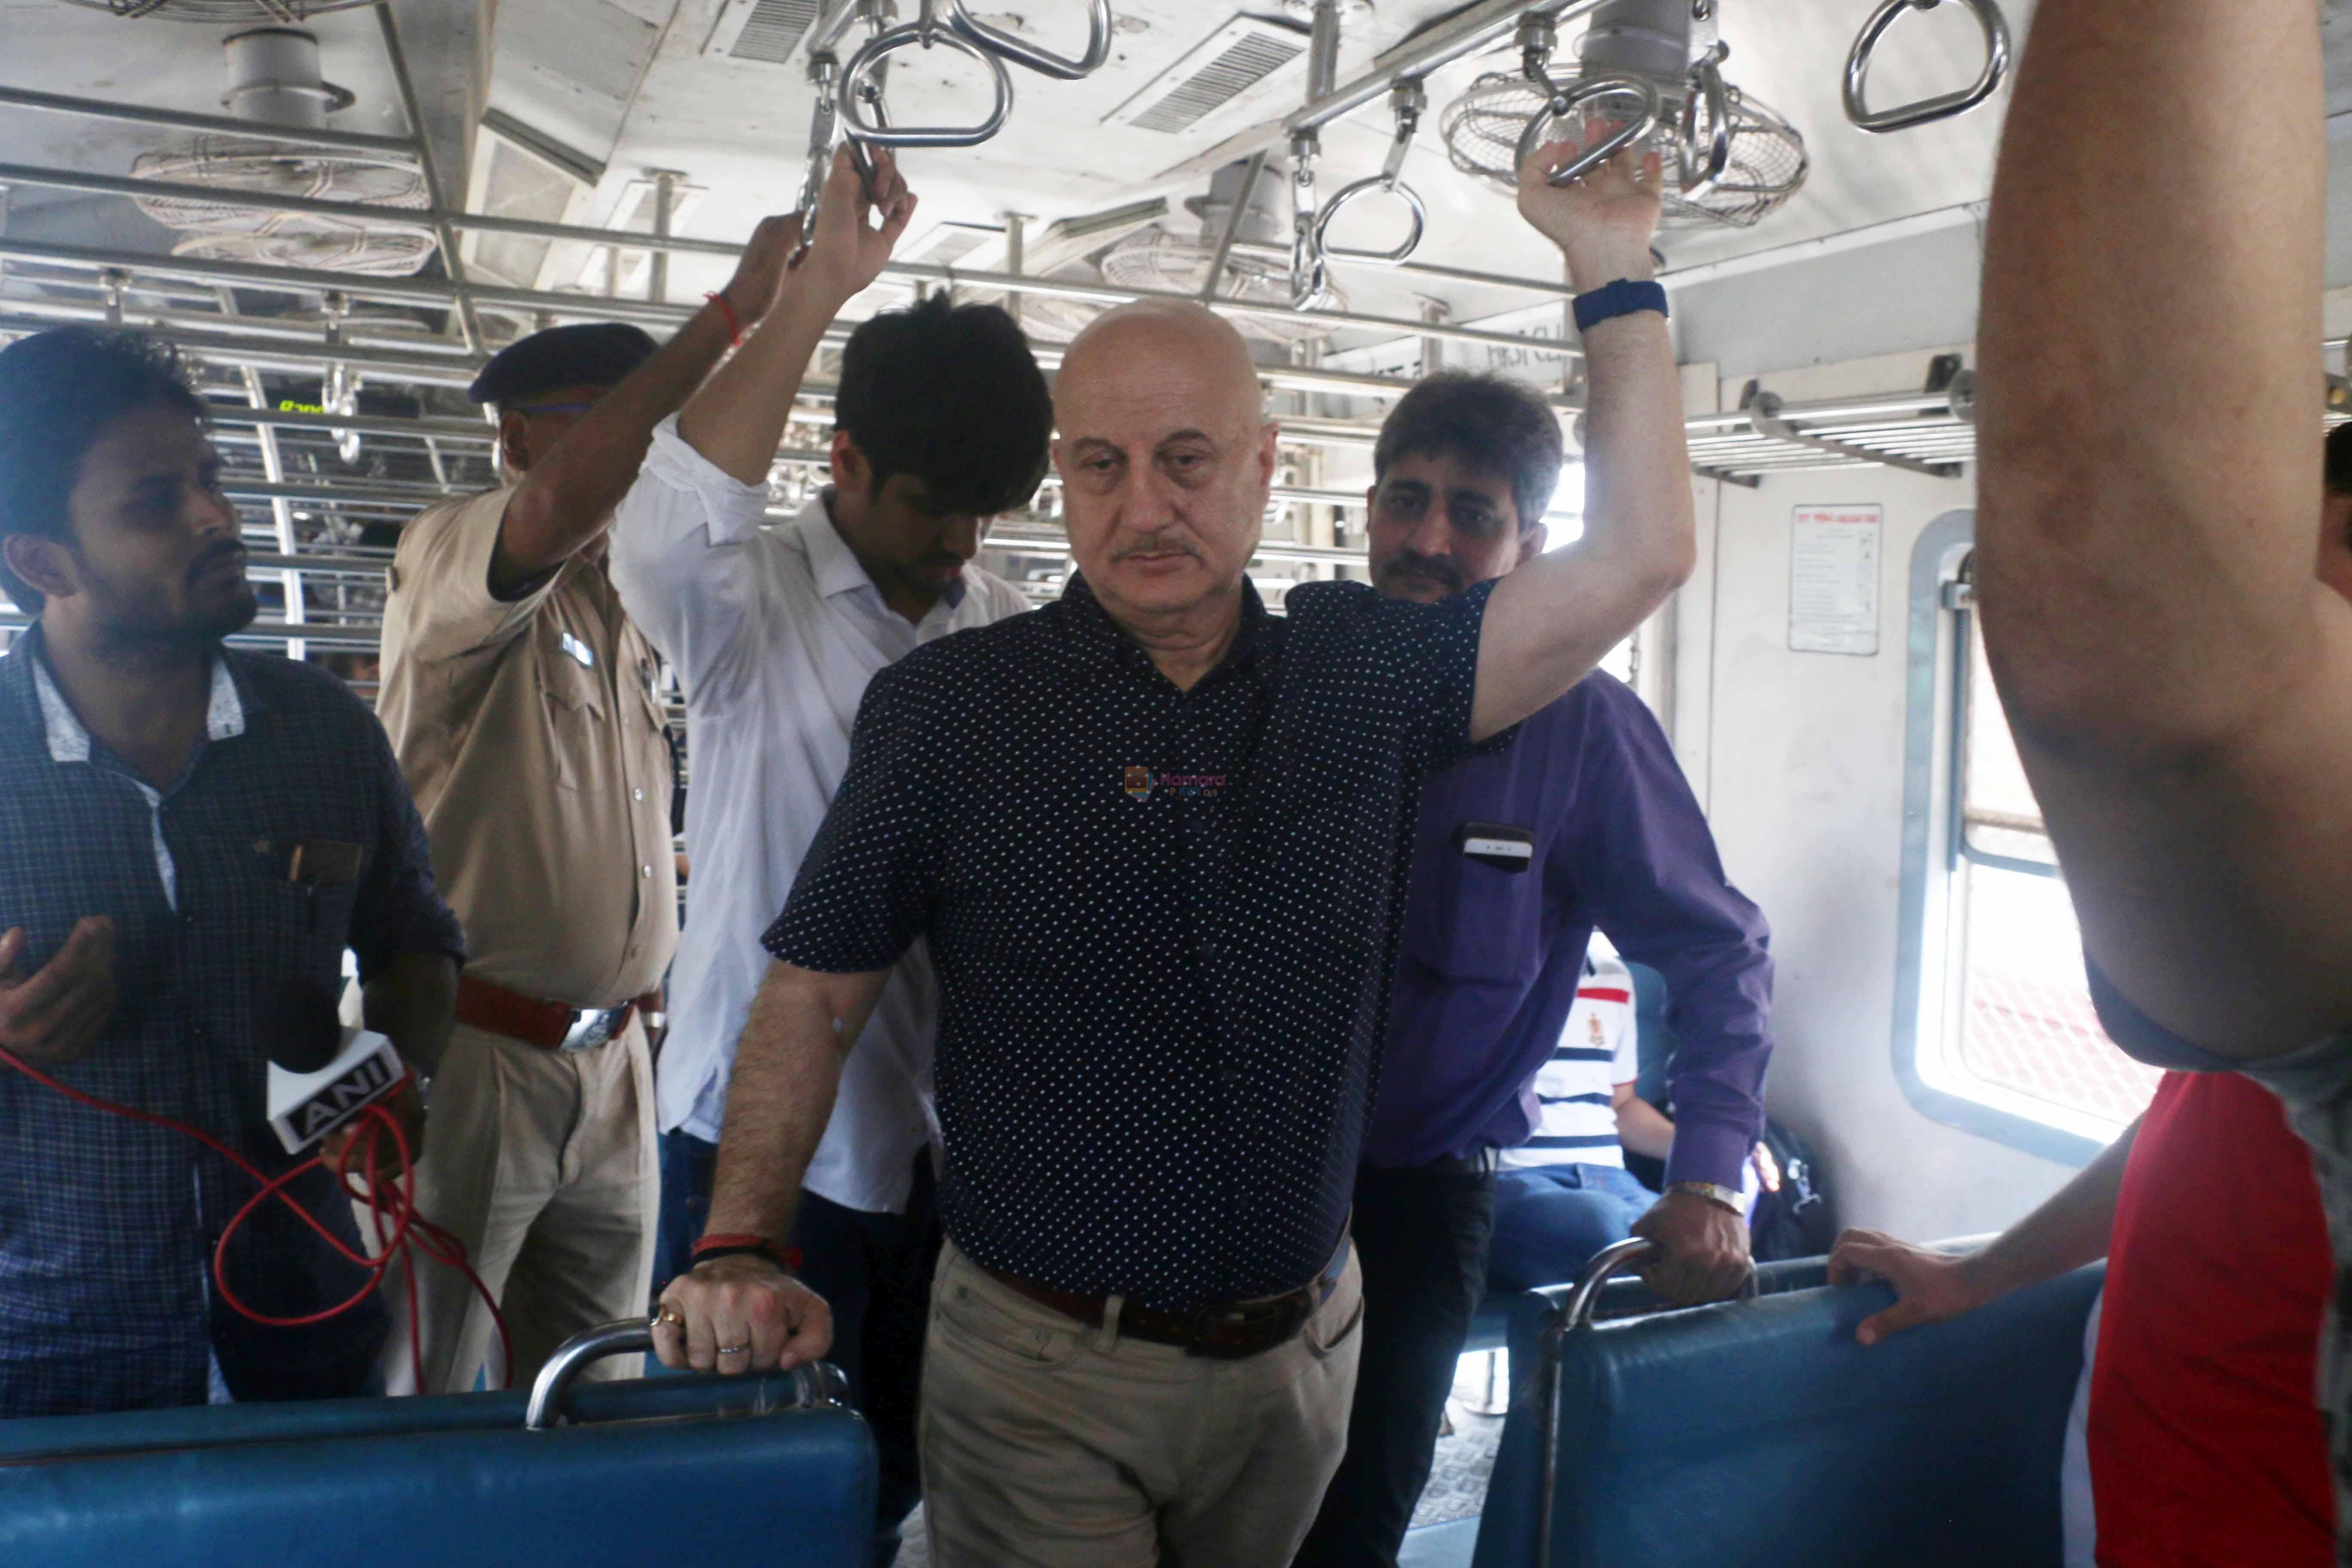 Anupam Kher travelled from CSMT to Bandra by harbour local as he completed 37 years in Mumbai on 2nd June 2018